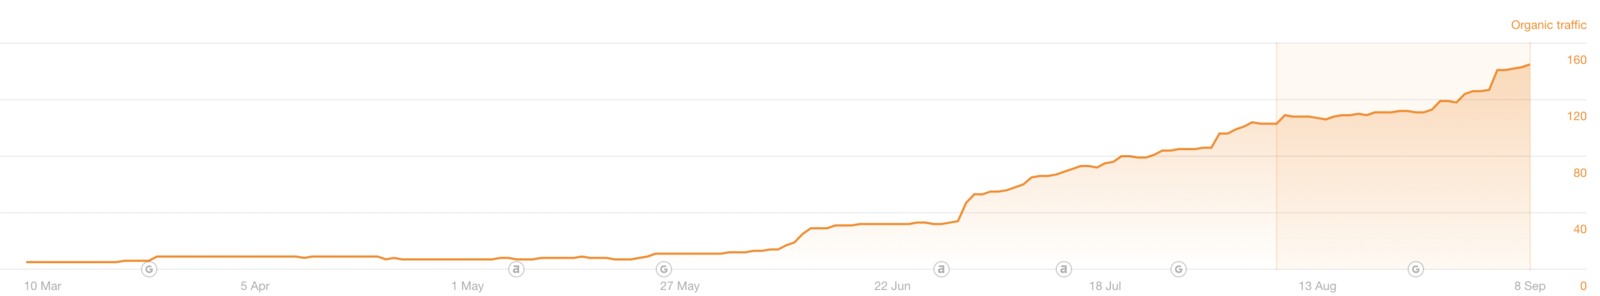 organic traffic growth chart of design builder over last 6 months